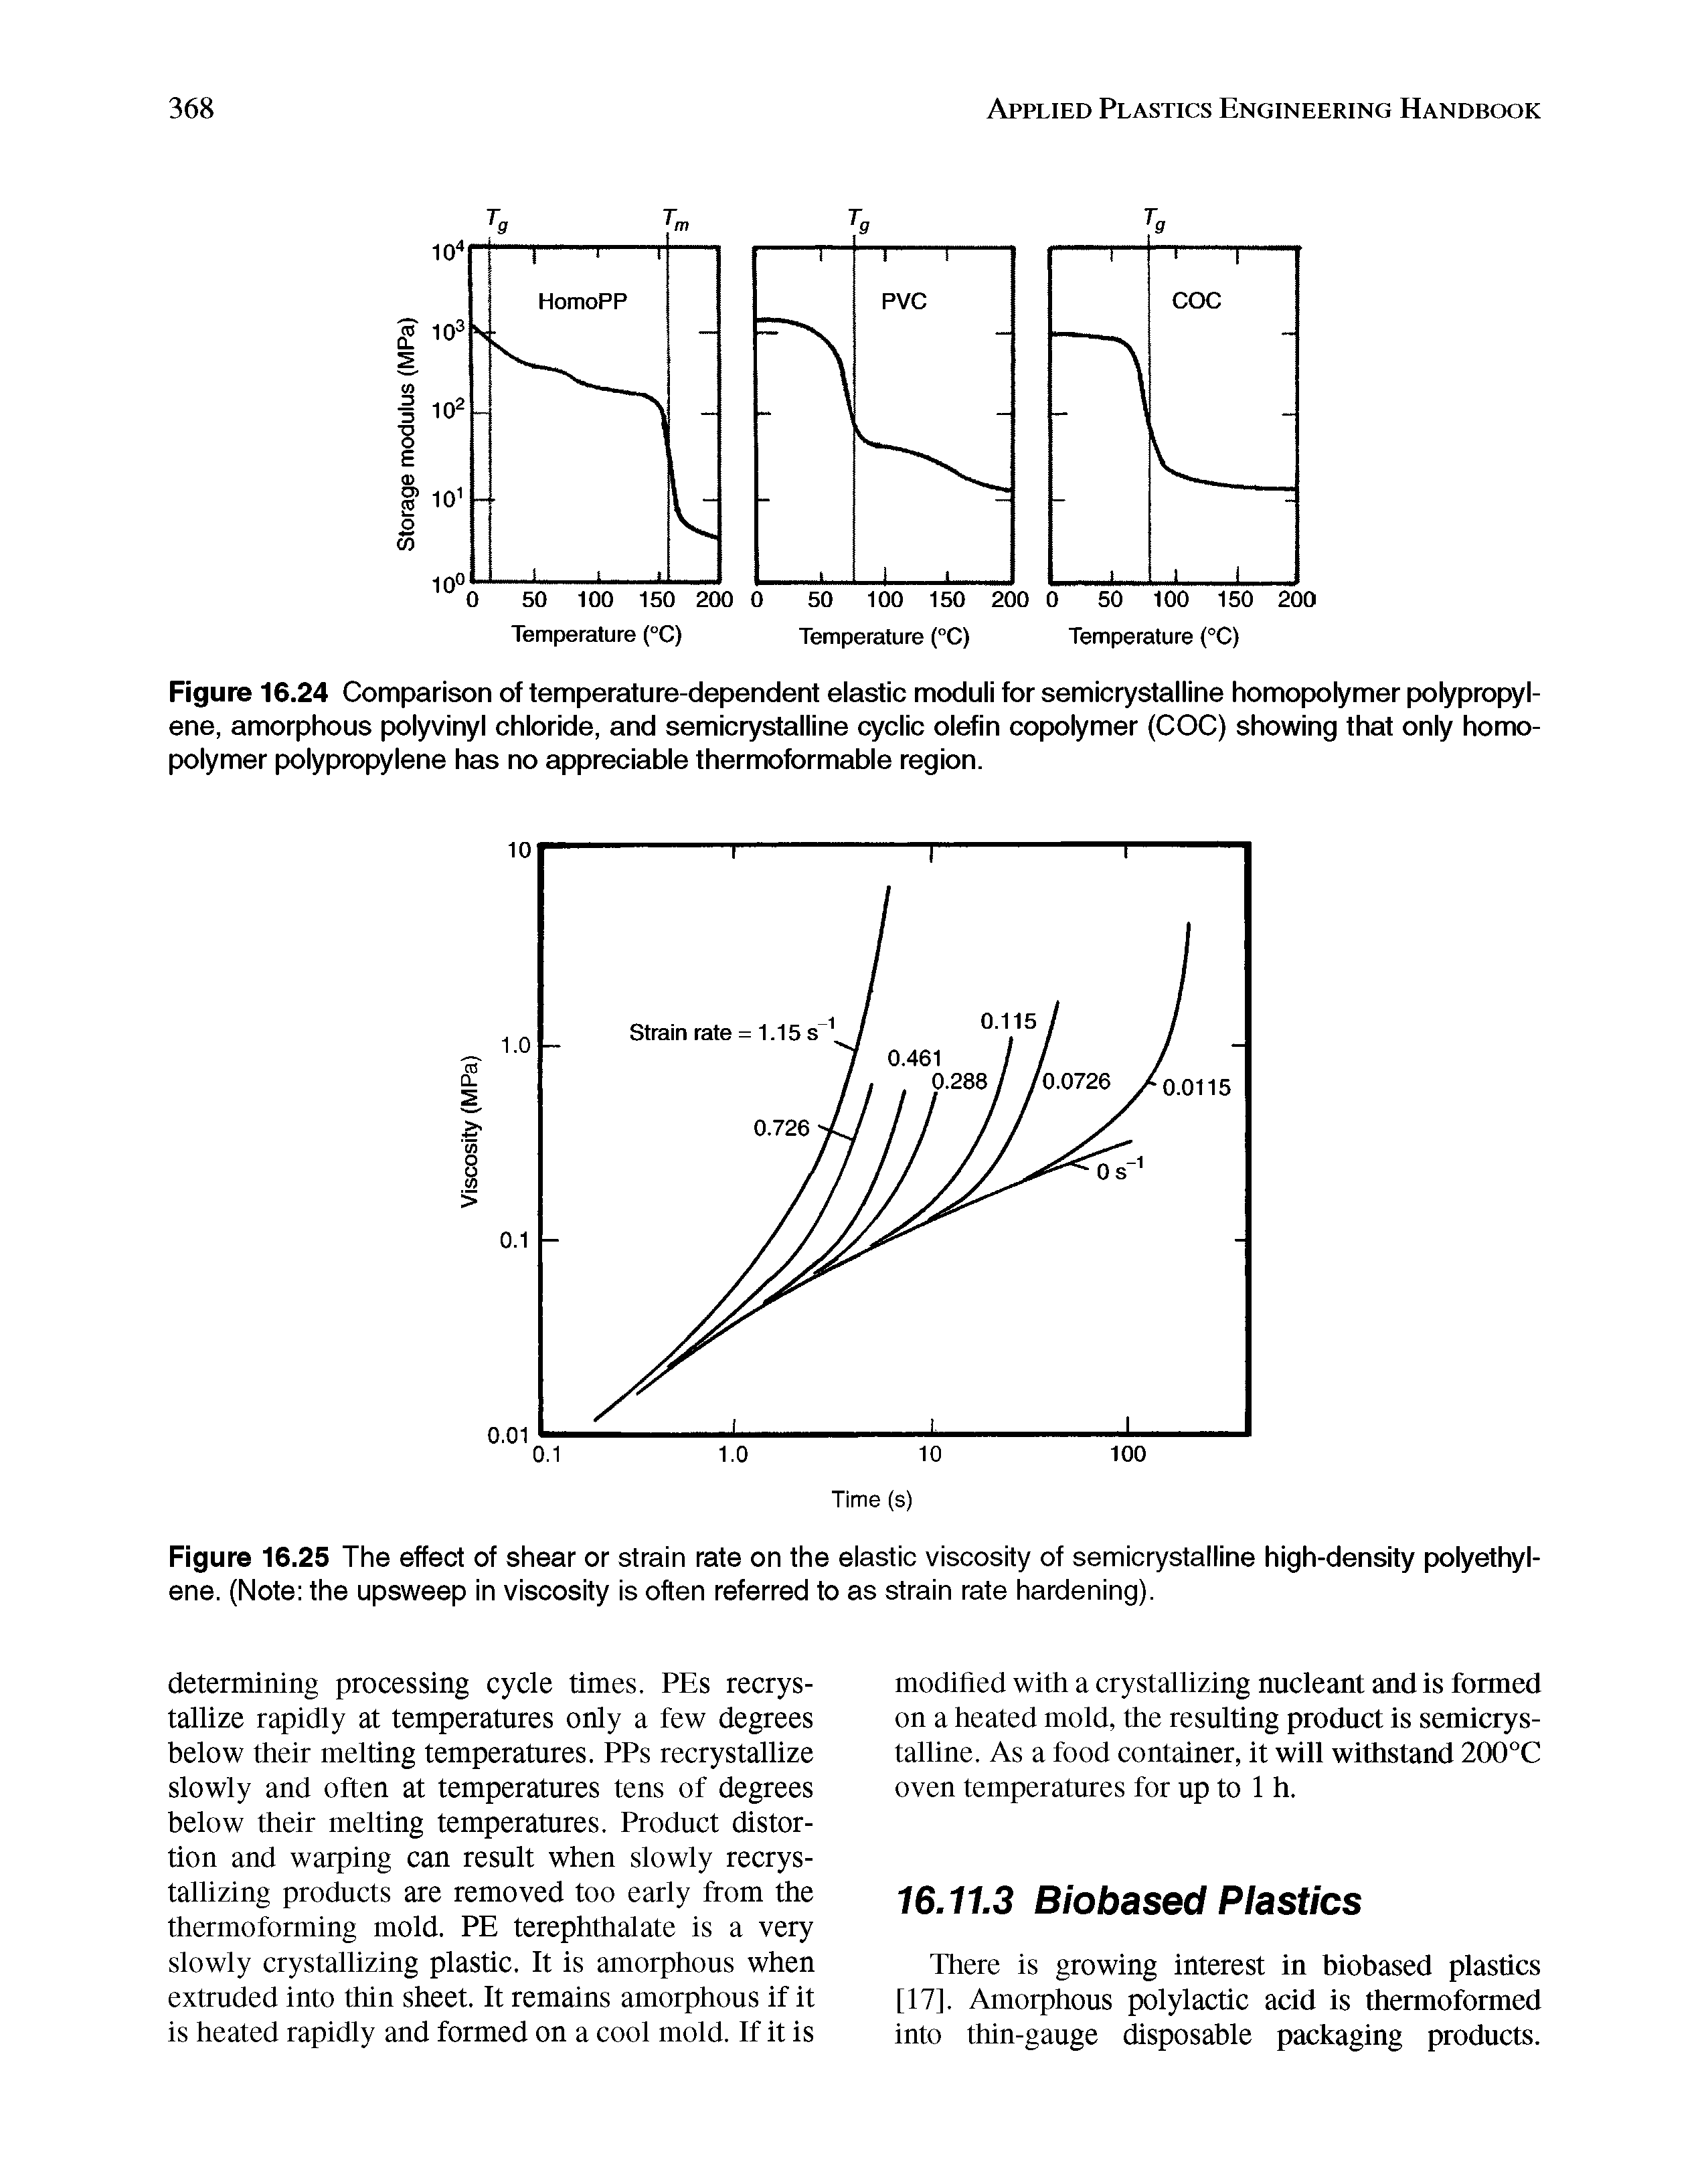 Figure 16.25 The effect of shear or strain rate on the elastic viscosity of semicrystalline high-density polyethylene. (Note the upsweep in viscosity is often referred to as strain rate hardening).